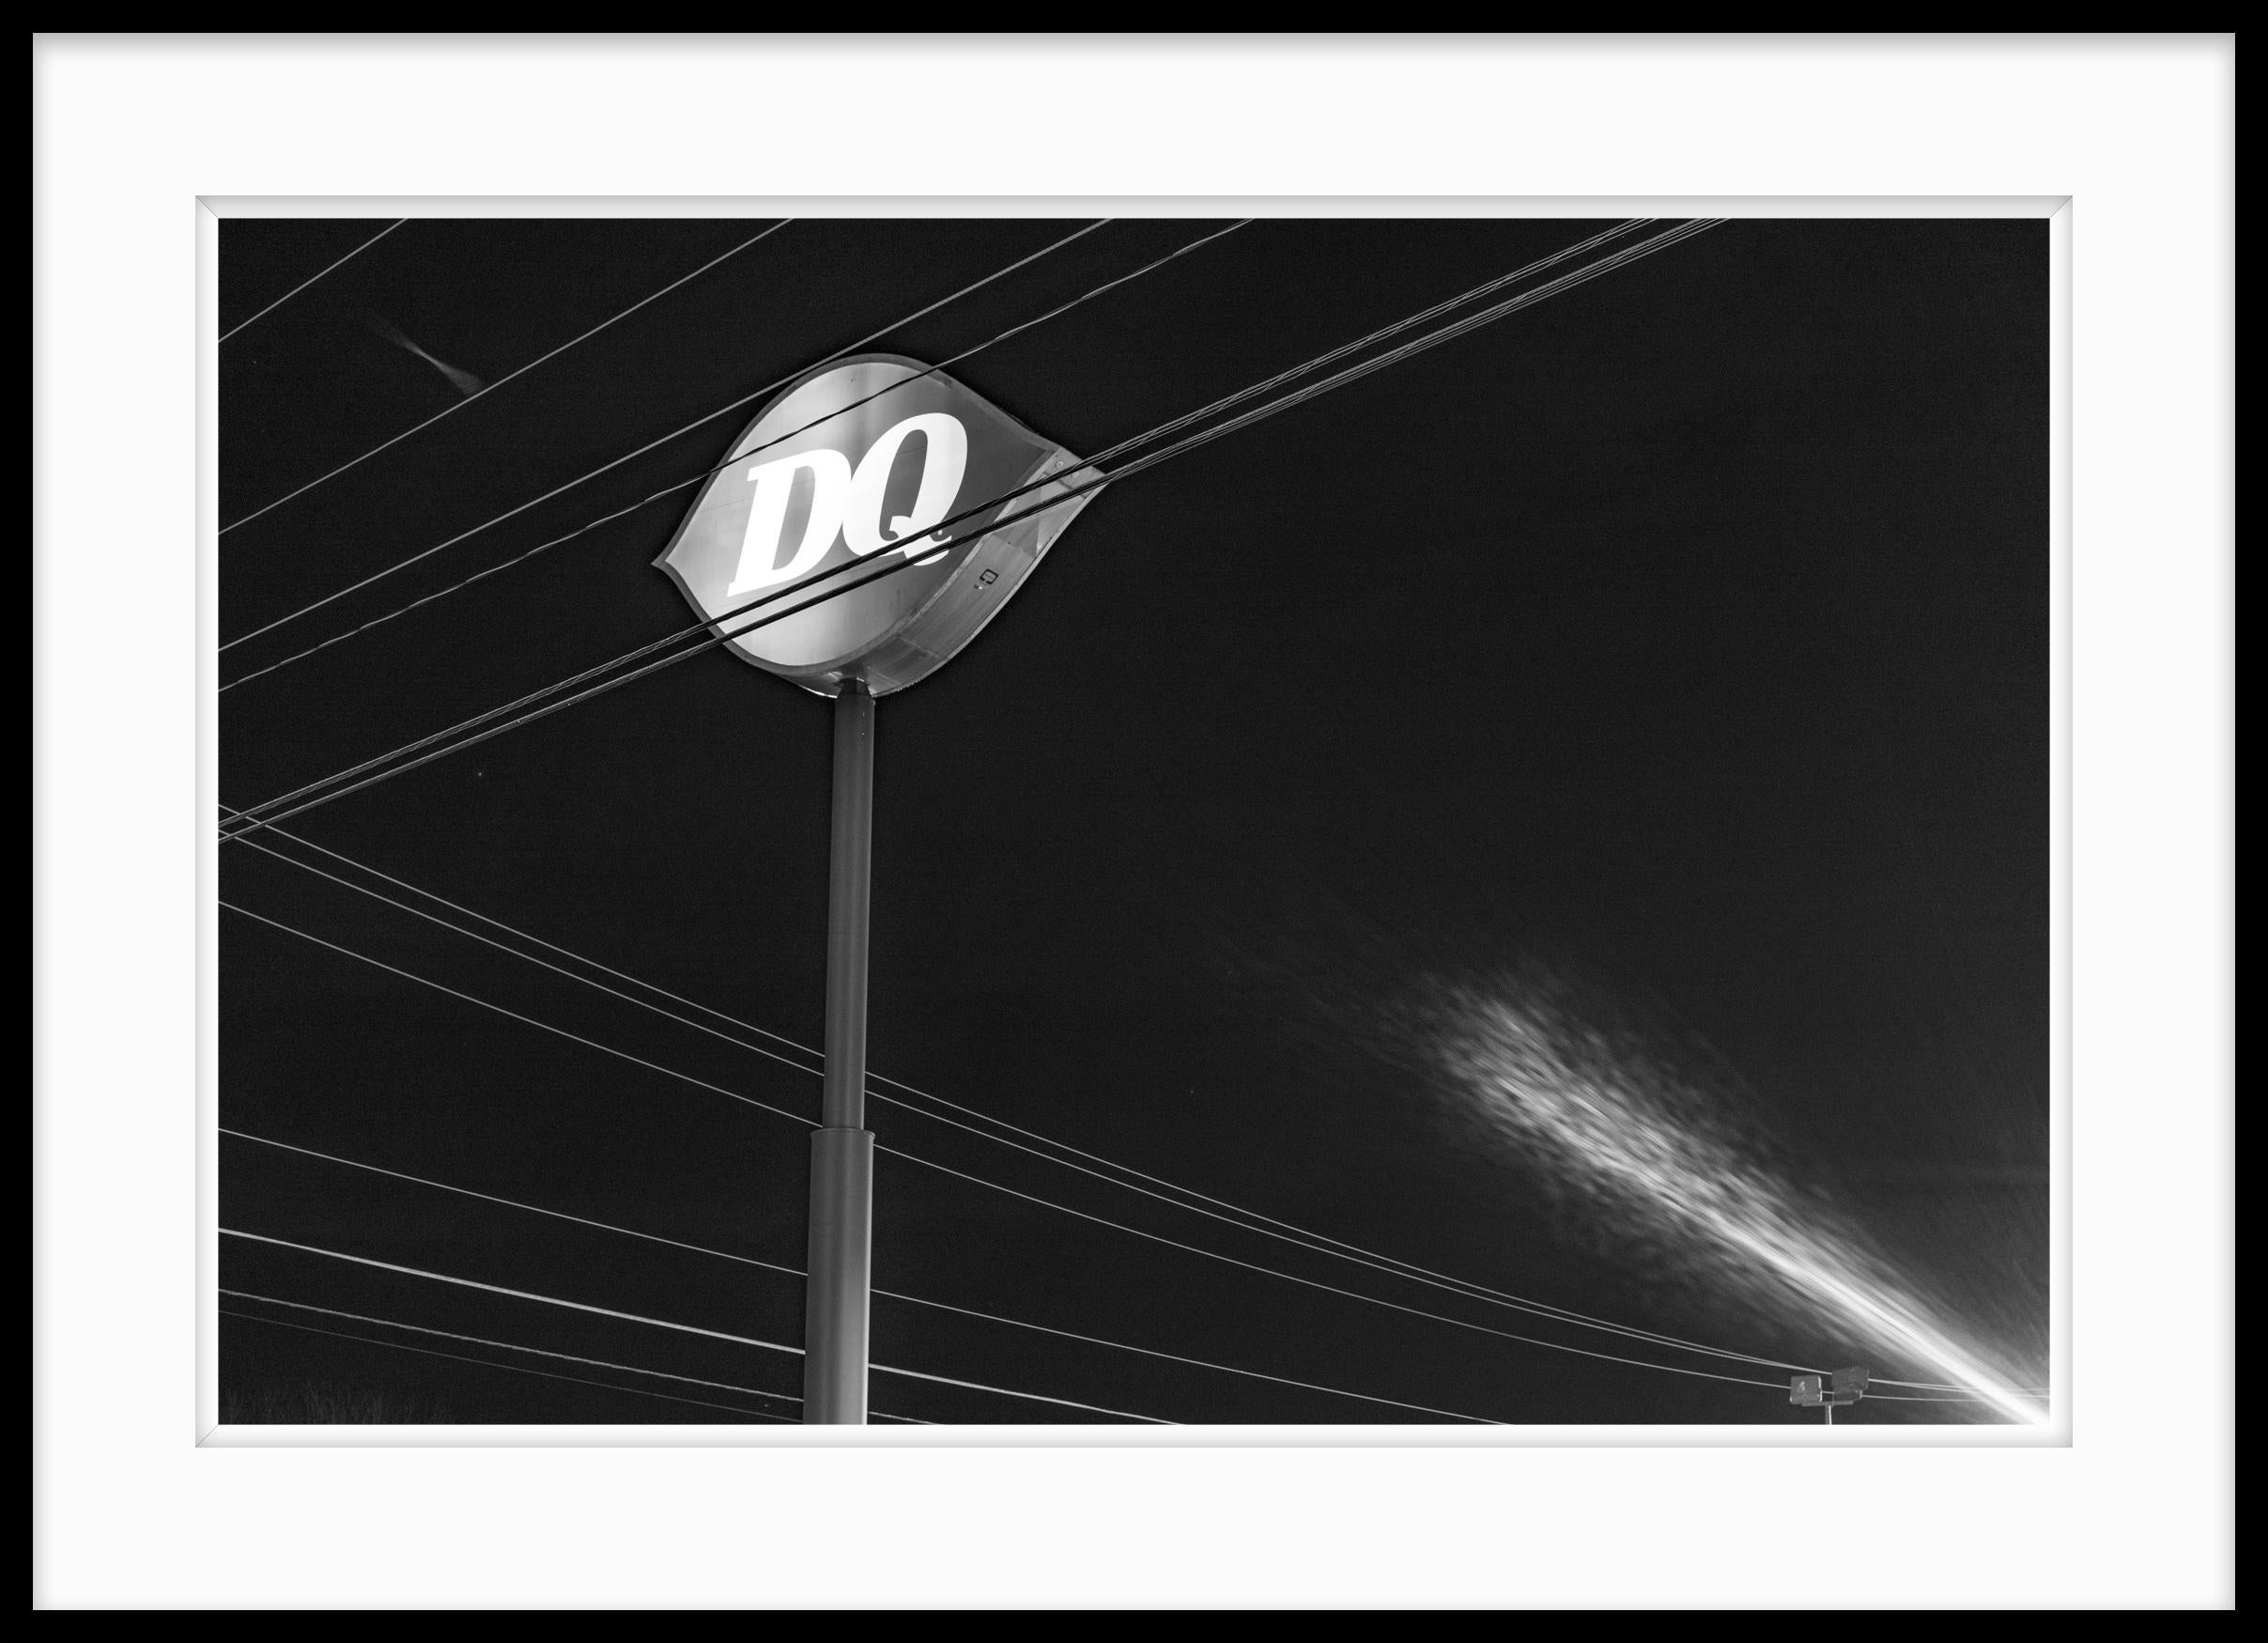 dq photos black and white